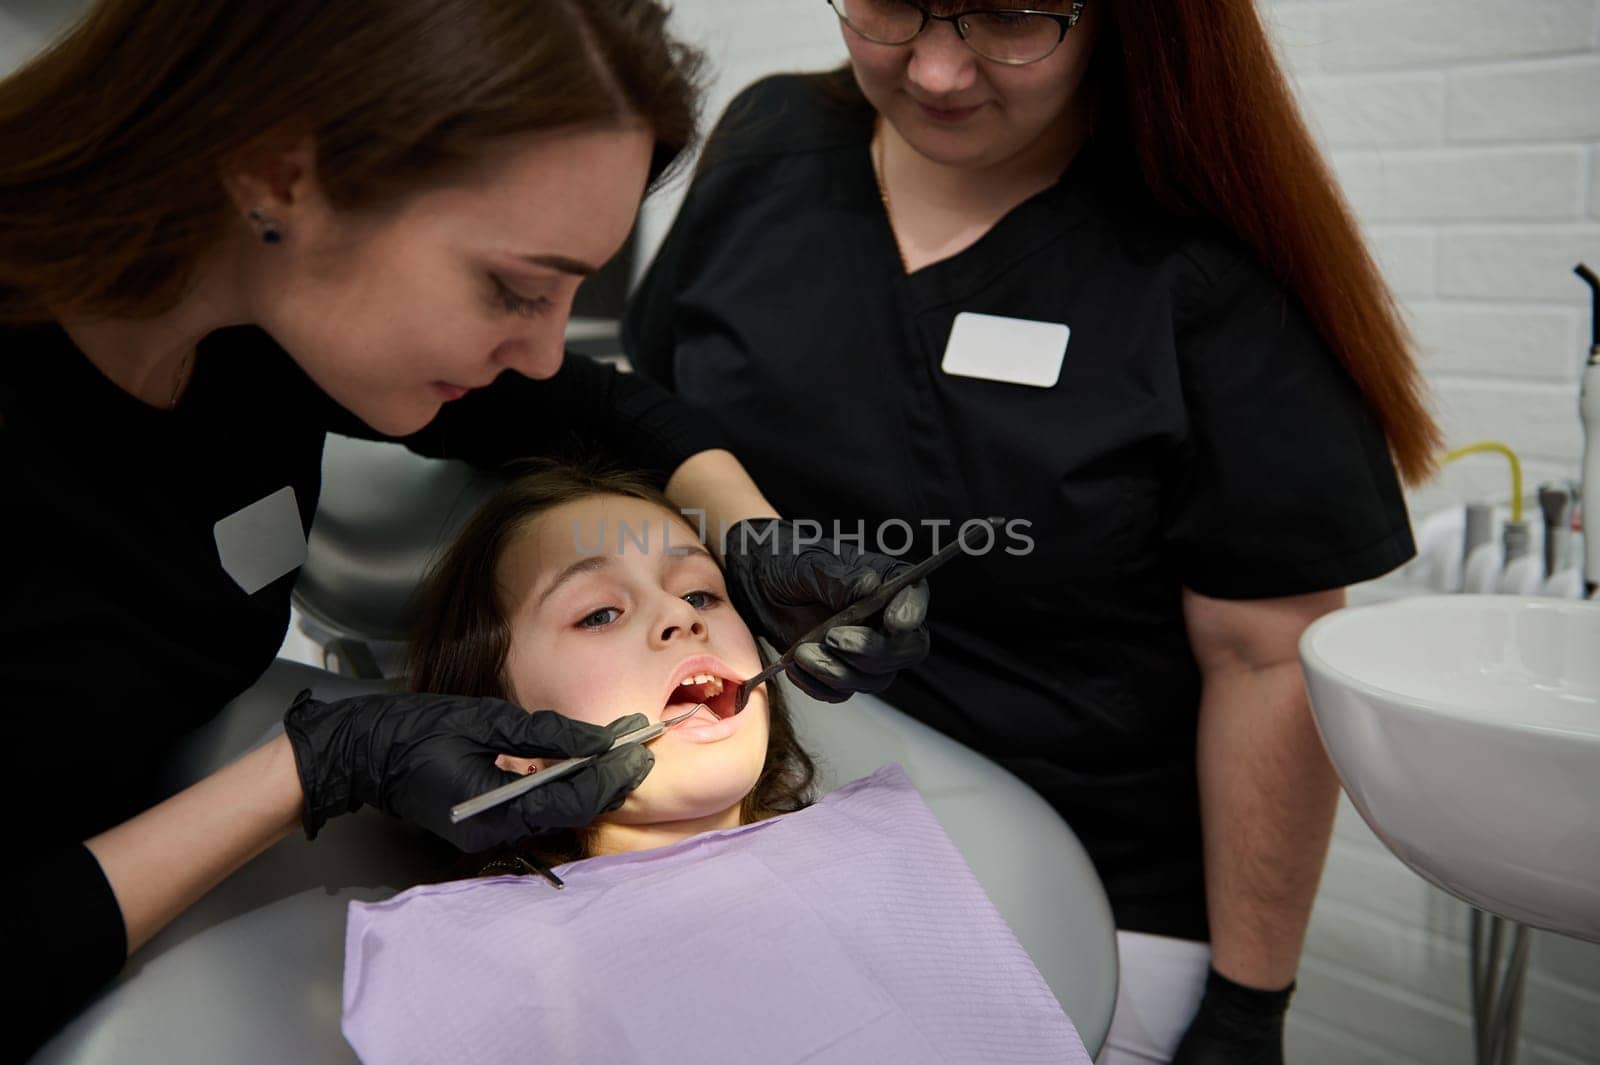 Portrait of beautiful child 6 years old, adorable little girl with open mouth, being examined by a dental hygienist, orthodontist while sitting in dentist chair in pediatric dentistry clinic. Close-up